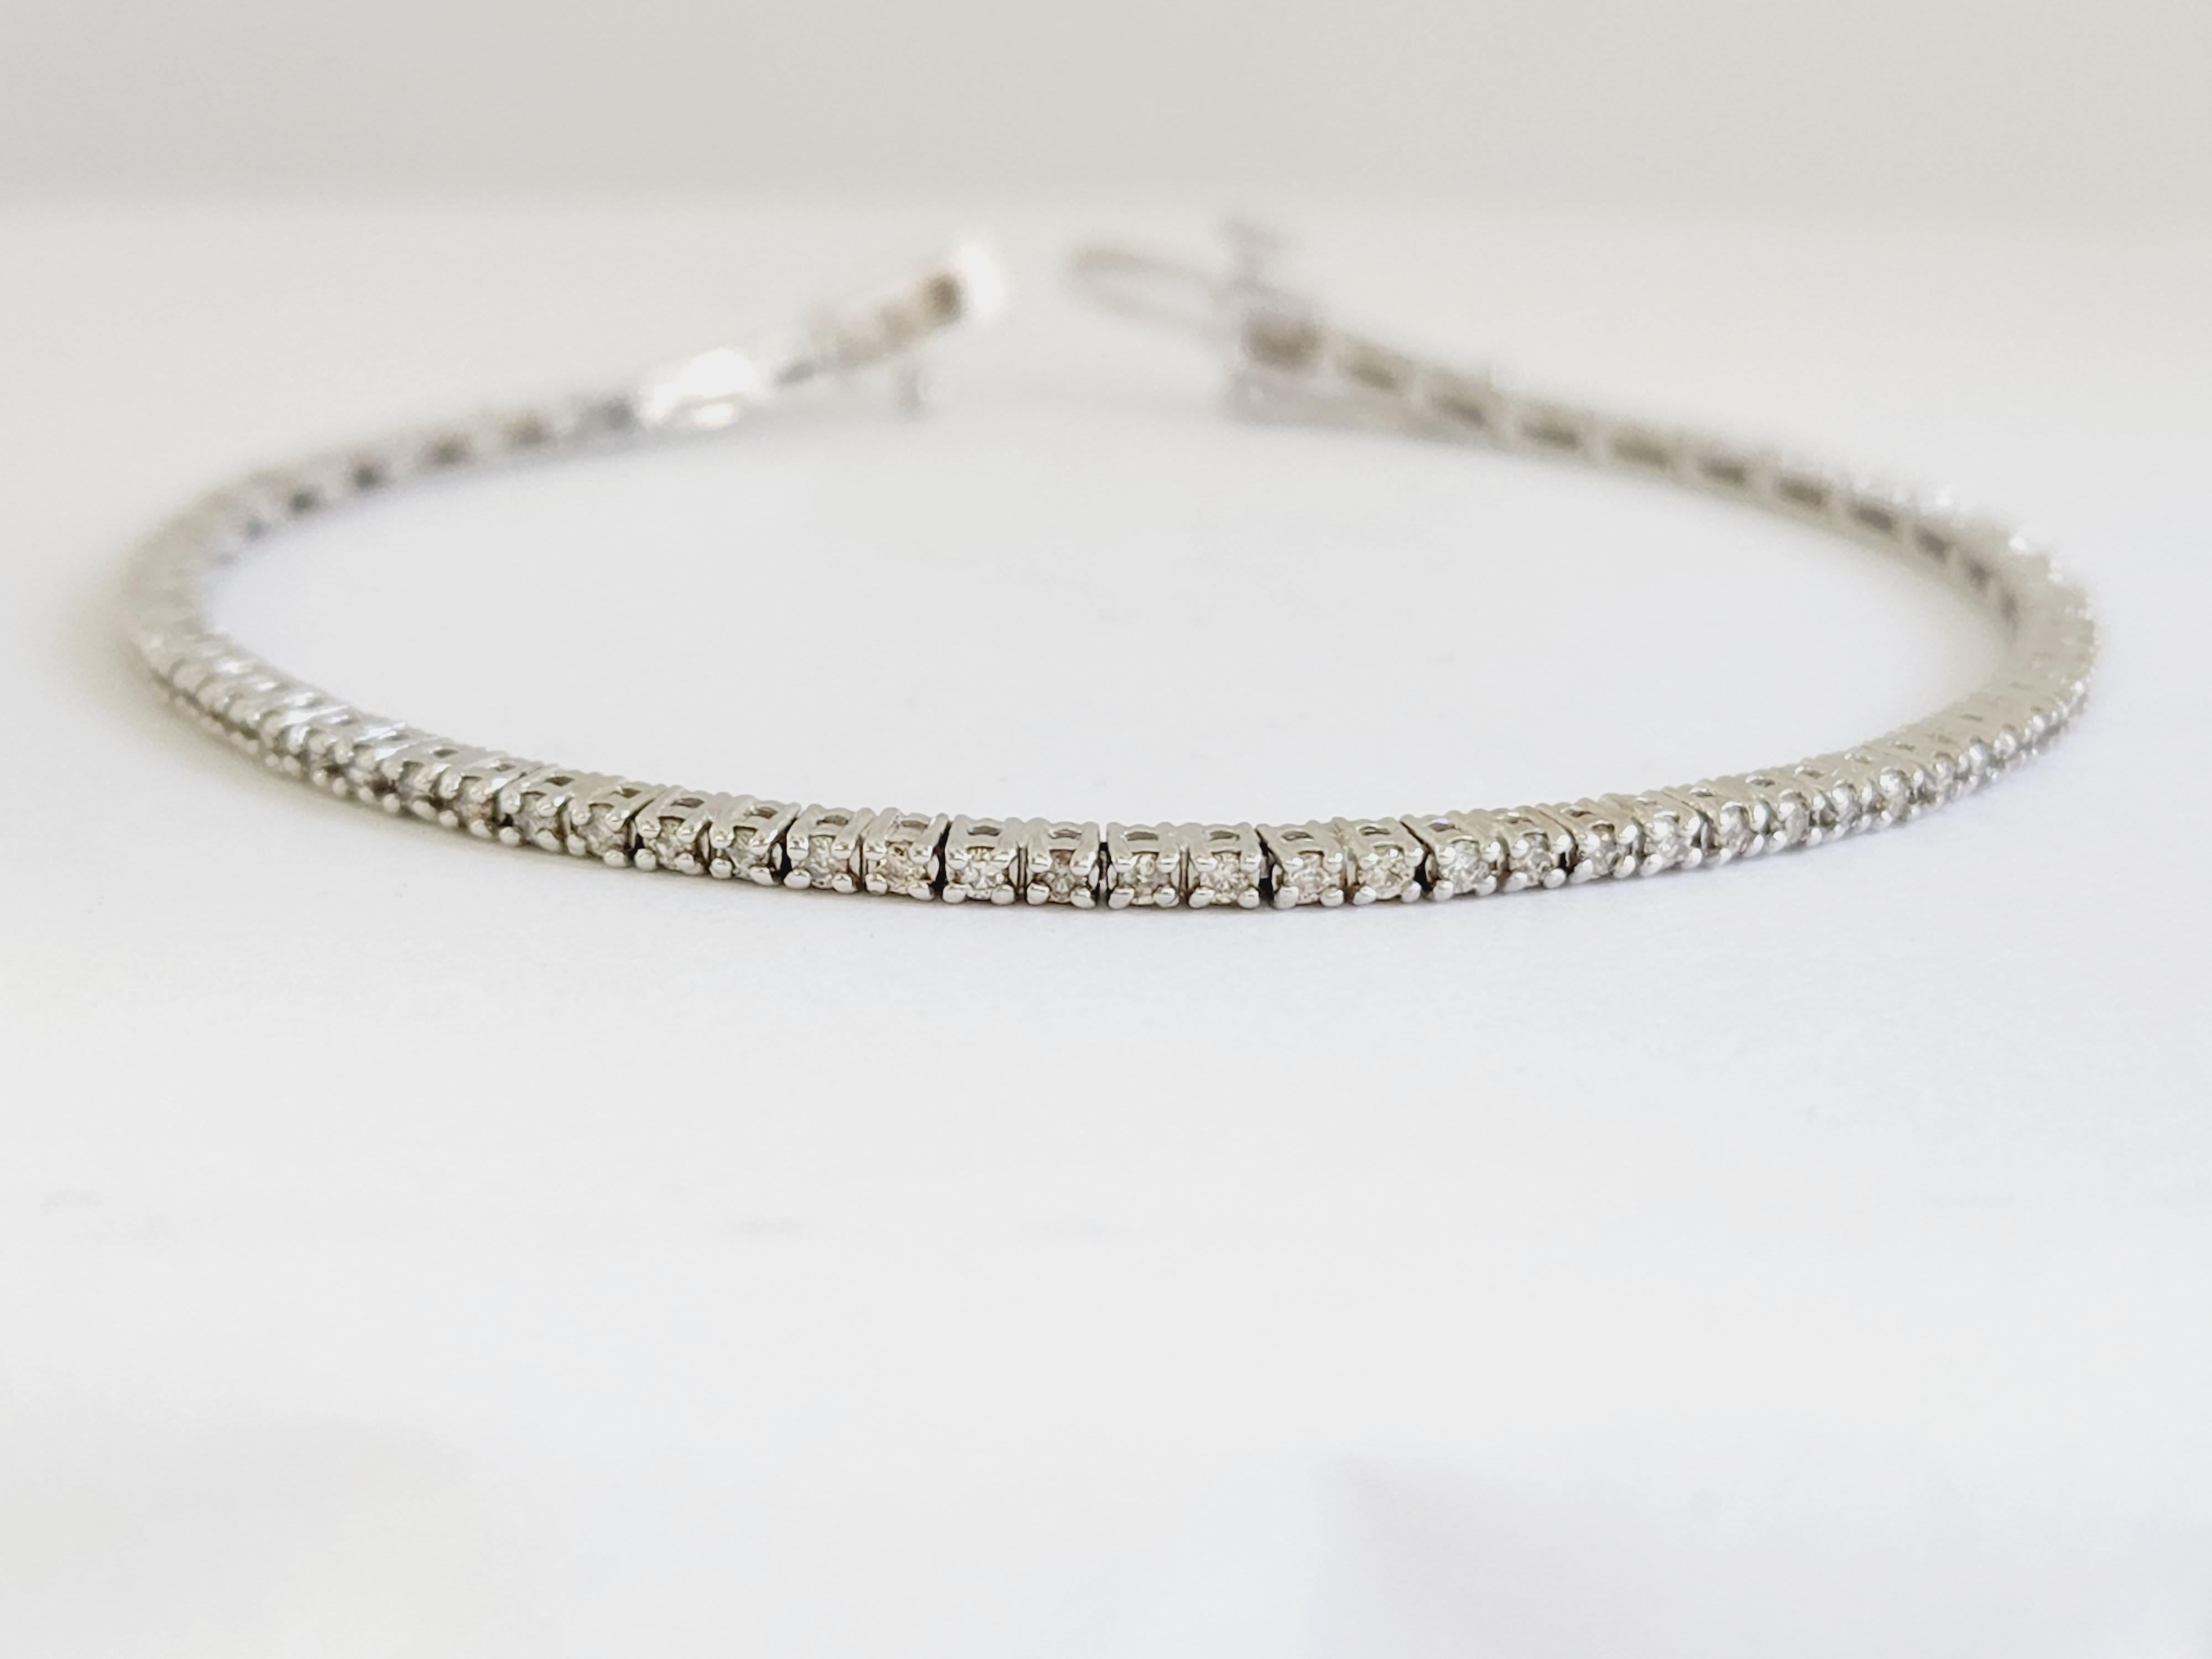 Very sparkling and shiny. a great quality tennis bracelet. 14k white gold. each stone is set in a classic four-prong style for maximum light brilliance. 
7 inch length. Average Color I, Clarity SI, Beautiful for everyday wear.